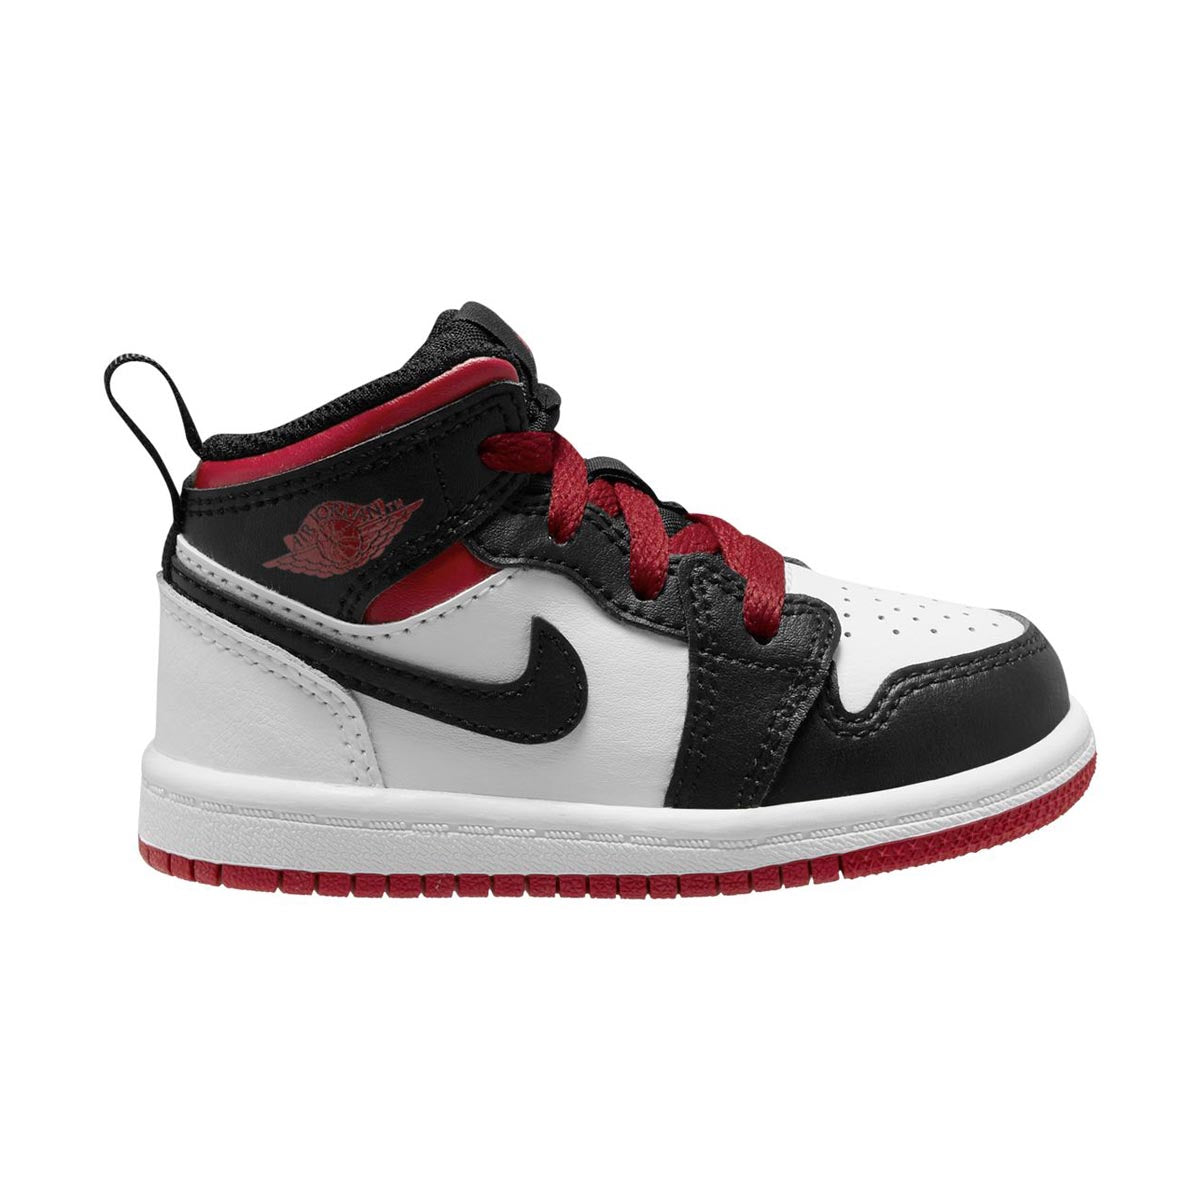 should i resell the part jordan 1 low gym red